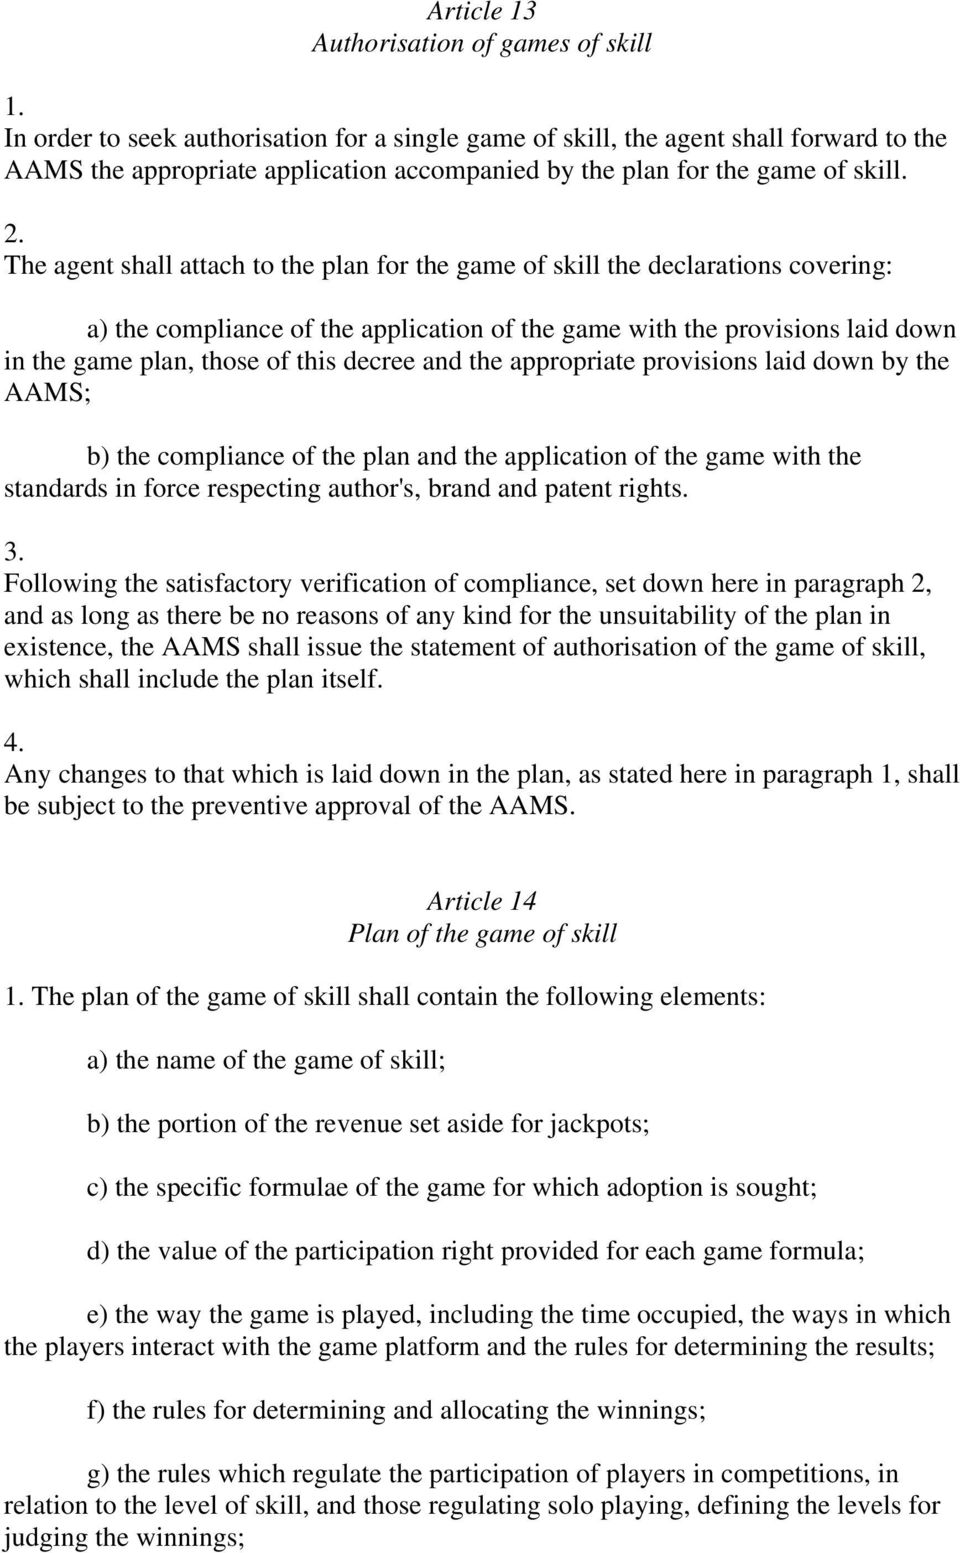 The agent shall attach to the plan for the game of skill the declarations covering: a) the compliance of the application of the game with the provisions laid down in the game plan, those of this